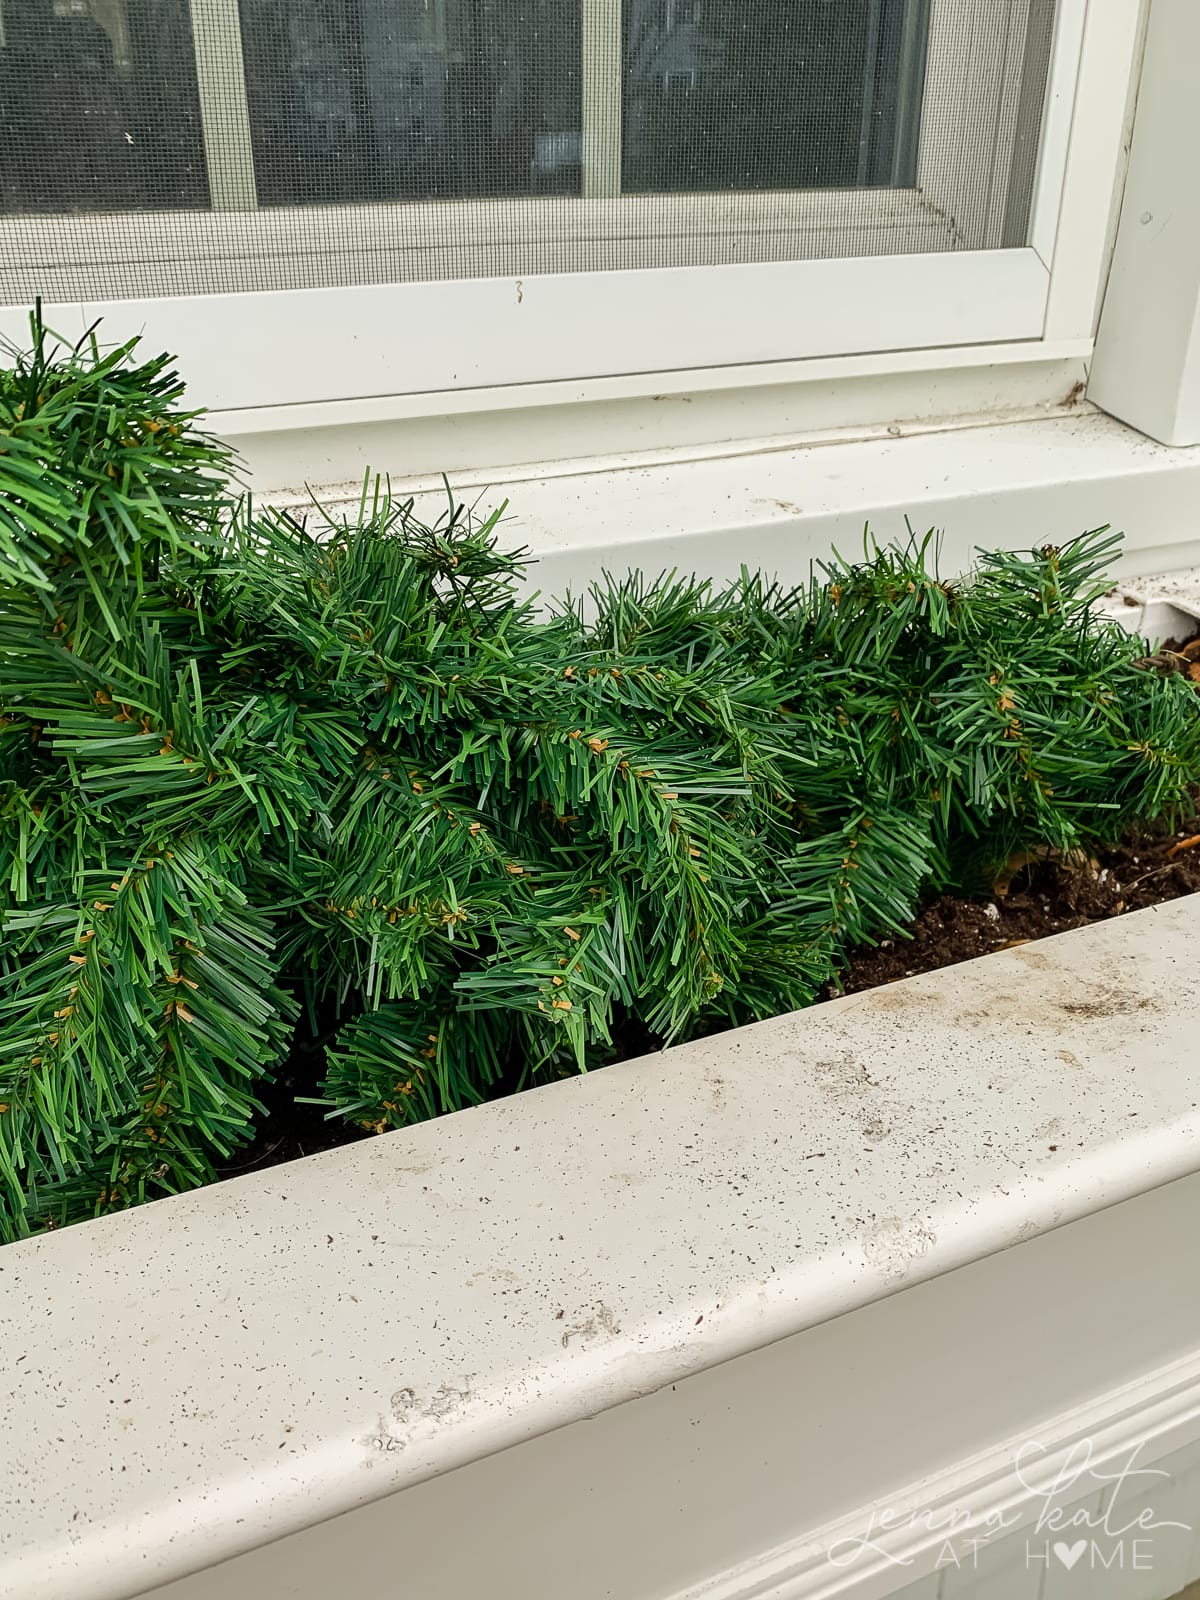 Artificial greenery to line the base of the window box